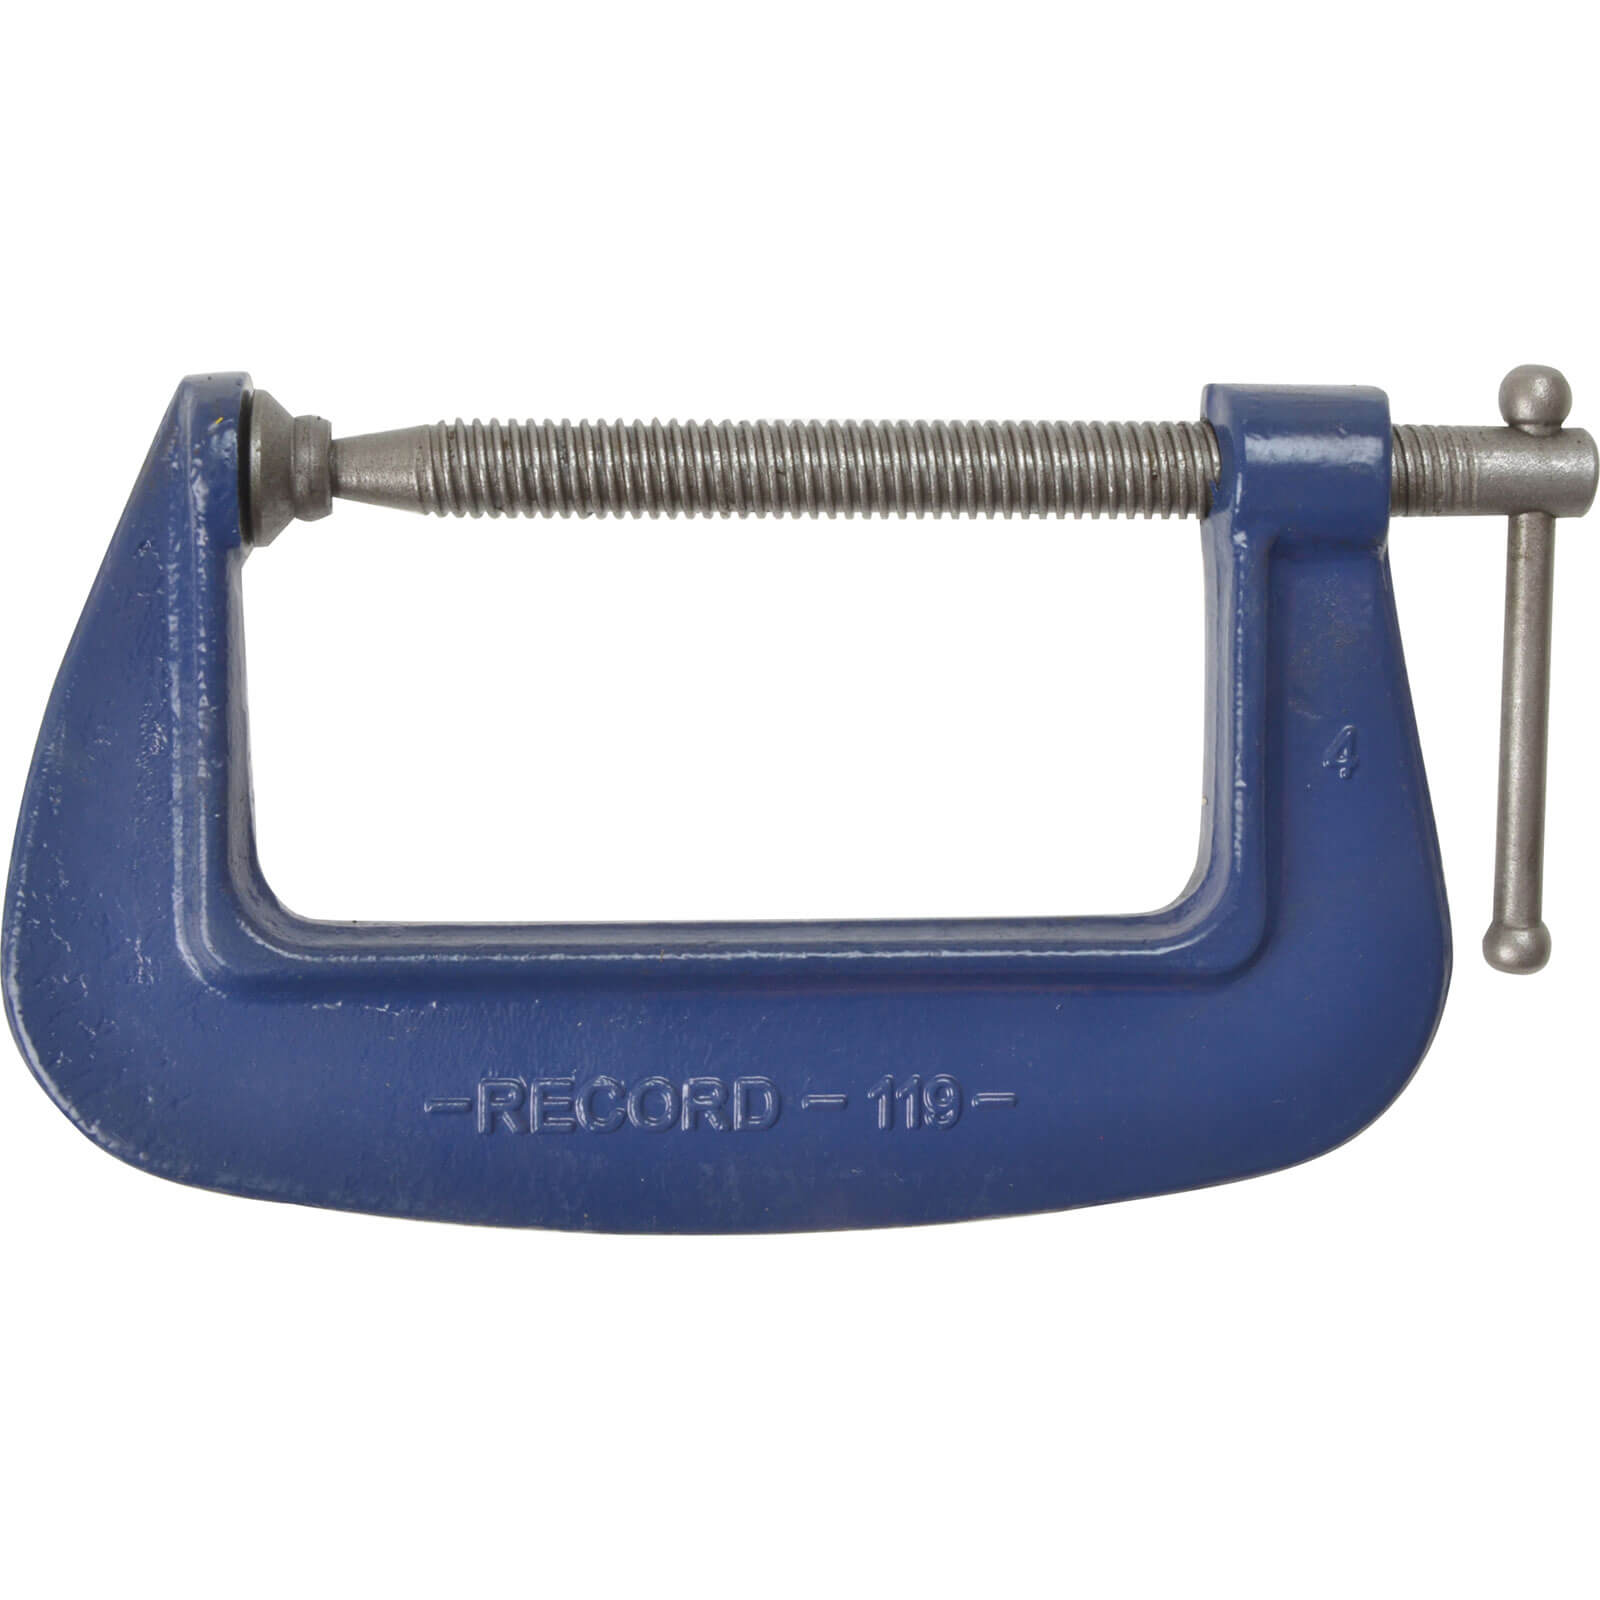 Photo of Irwin Record 119 G Clamp 75mm